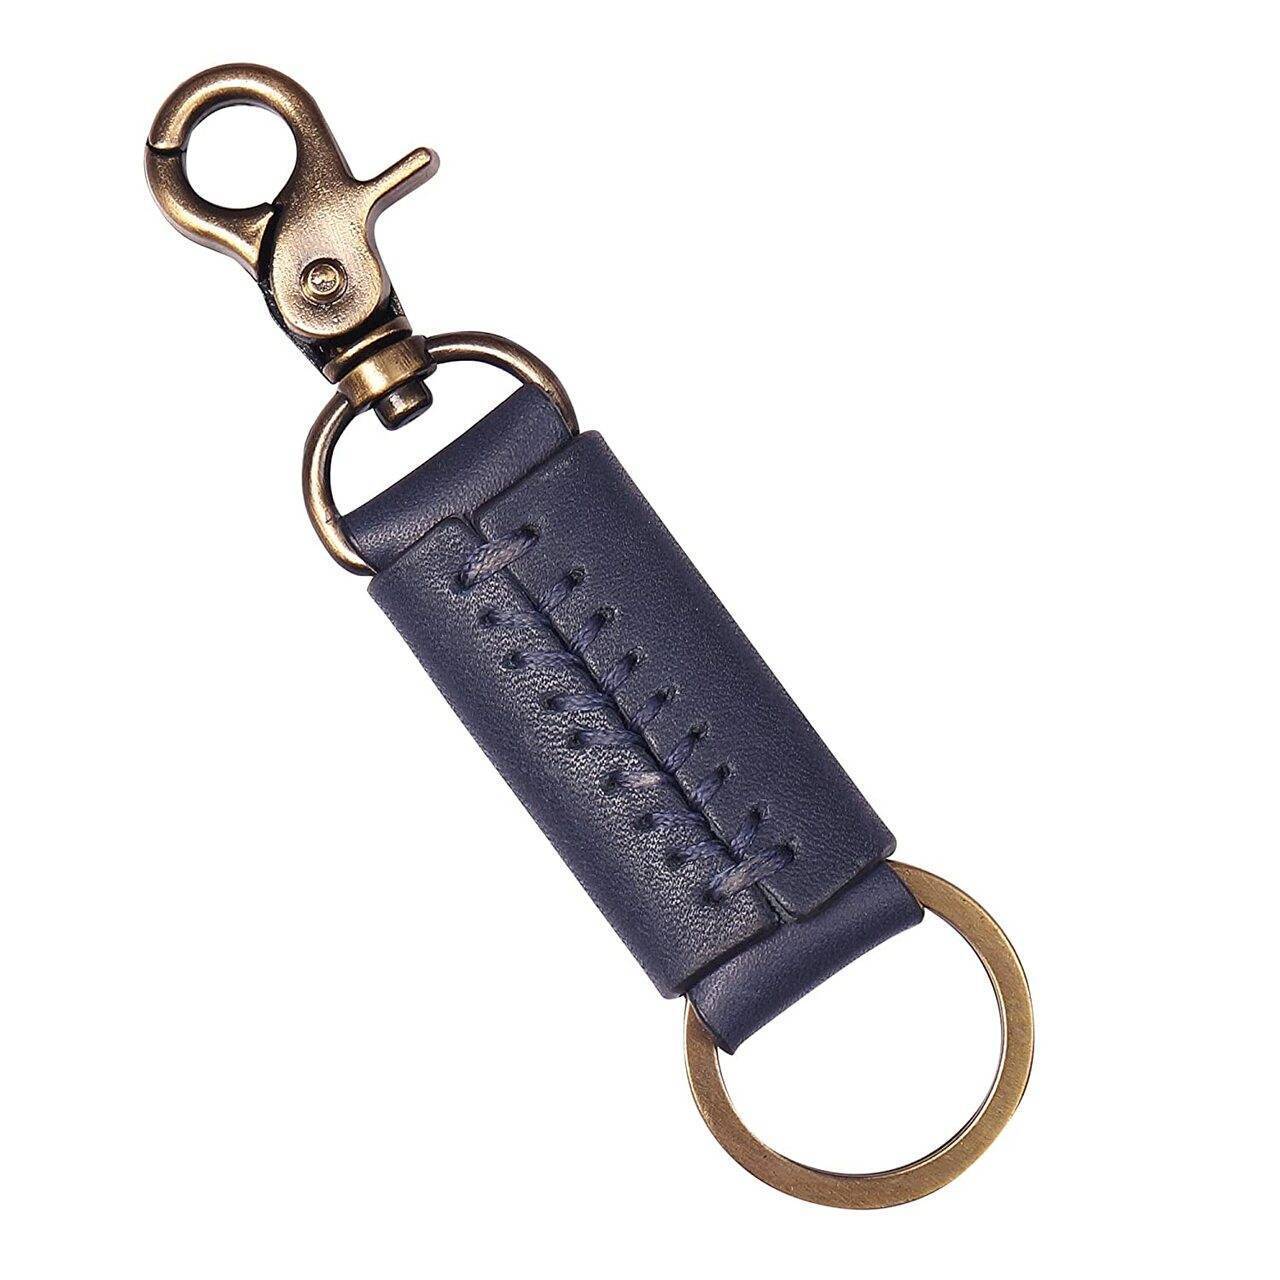 Ktm Stylish Long Lace Leather Key Ring For Bike Riders -Chocolate Color - Key  Ring - চাবির রিং